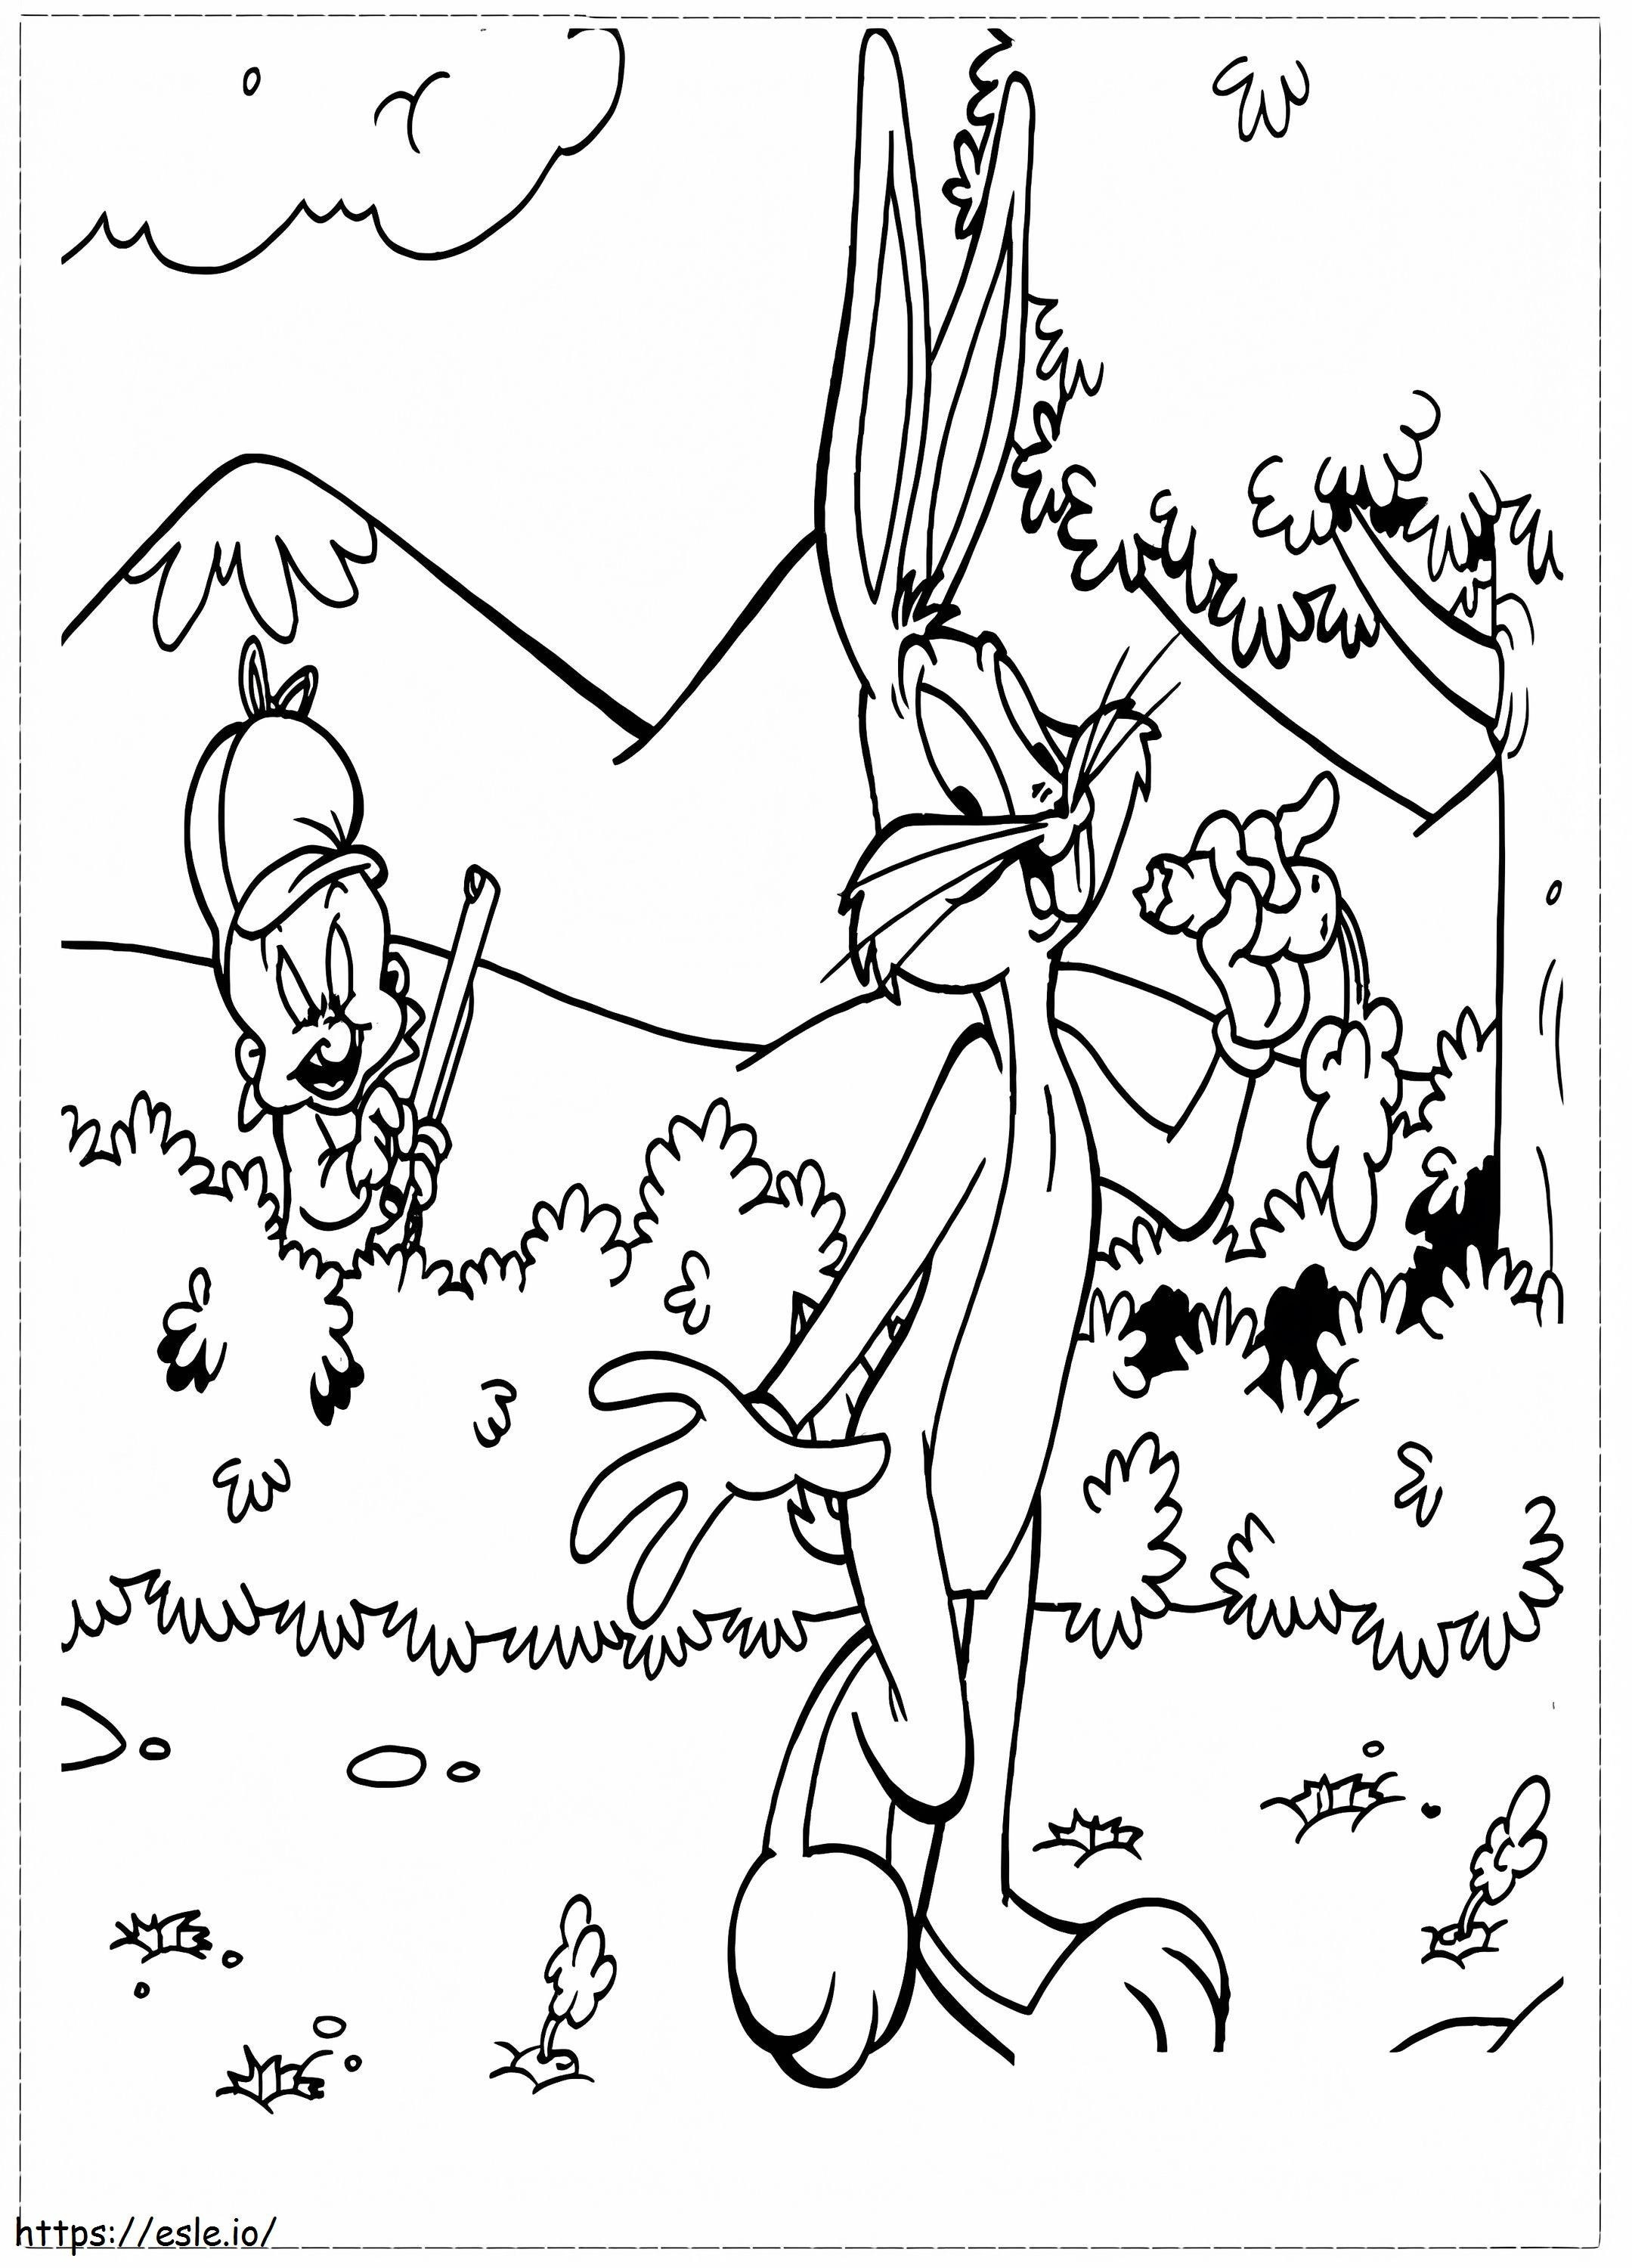 Bugs Bunny And Elmer Fudd 2 coloring page